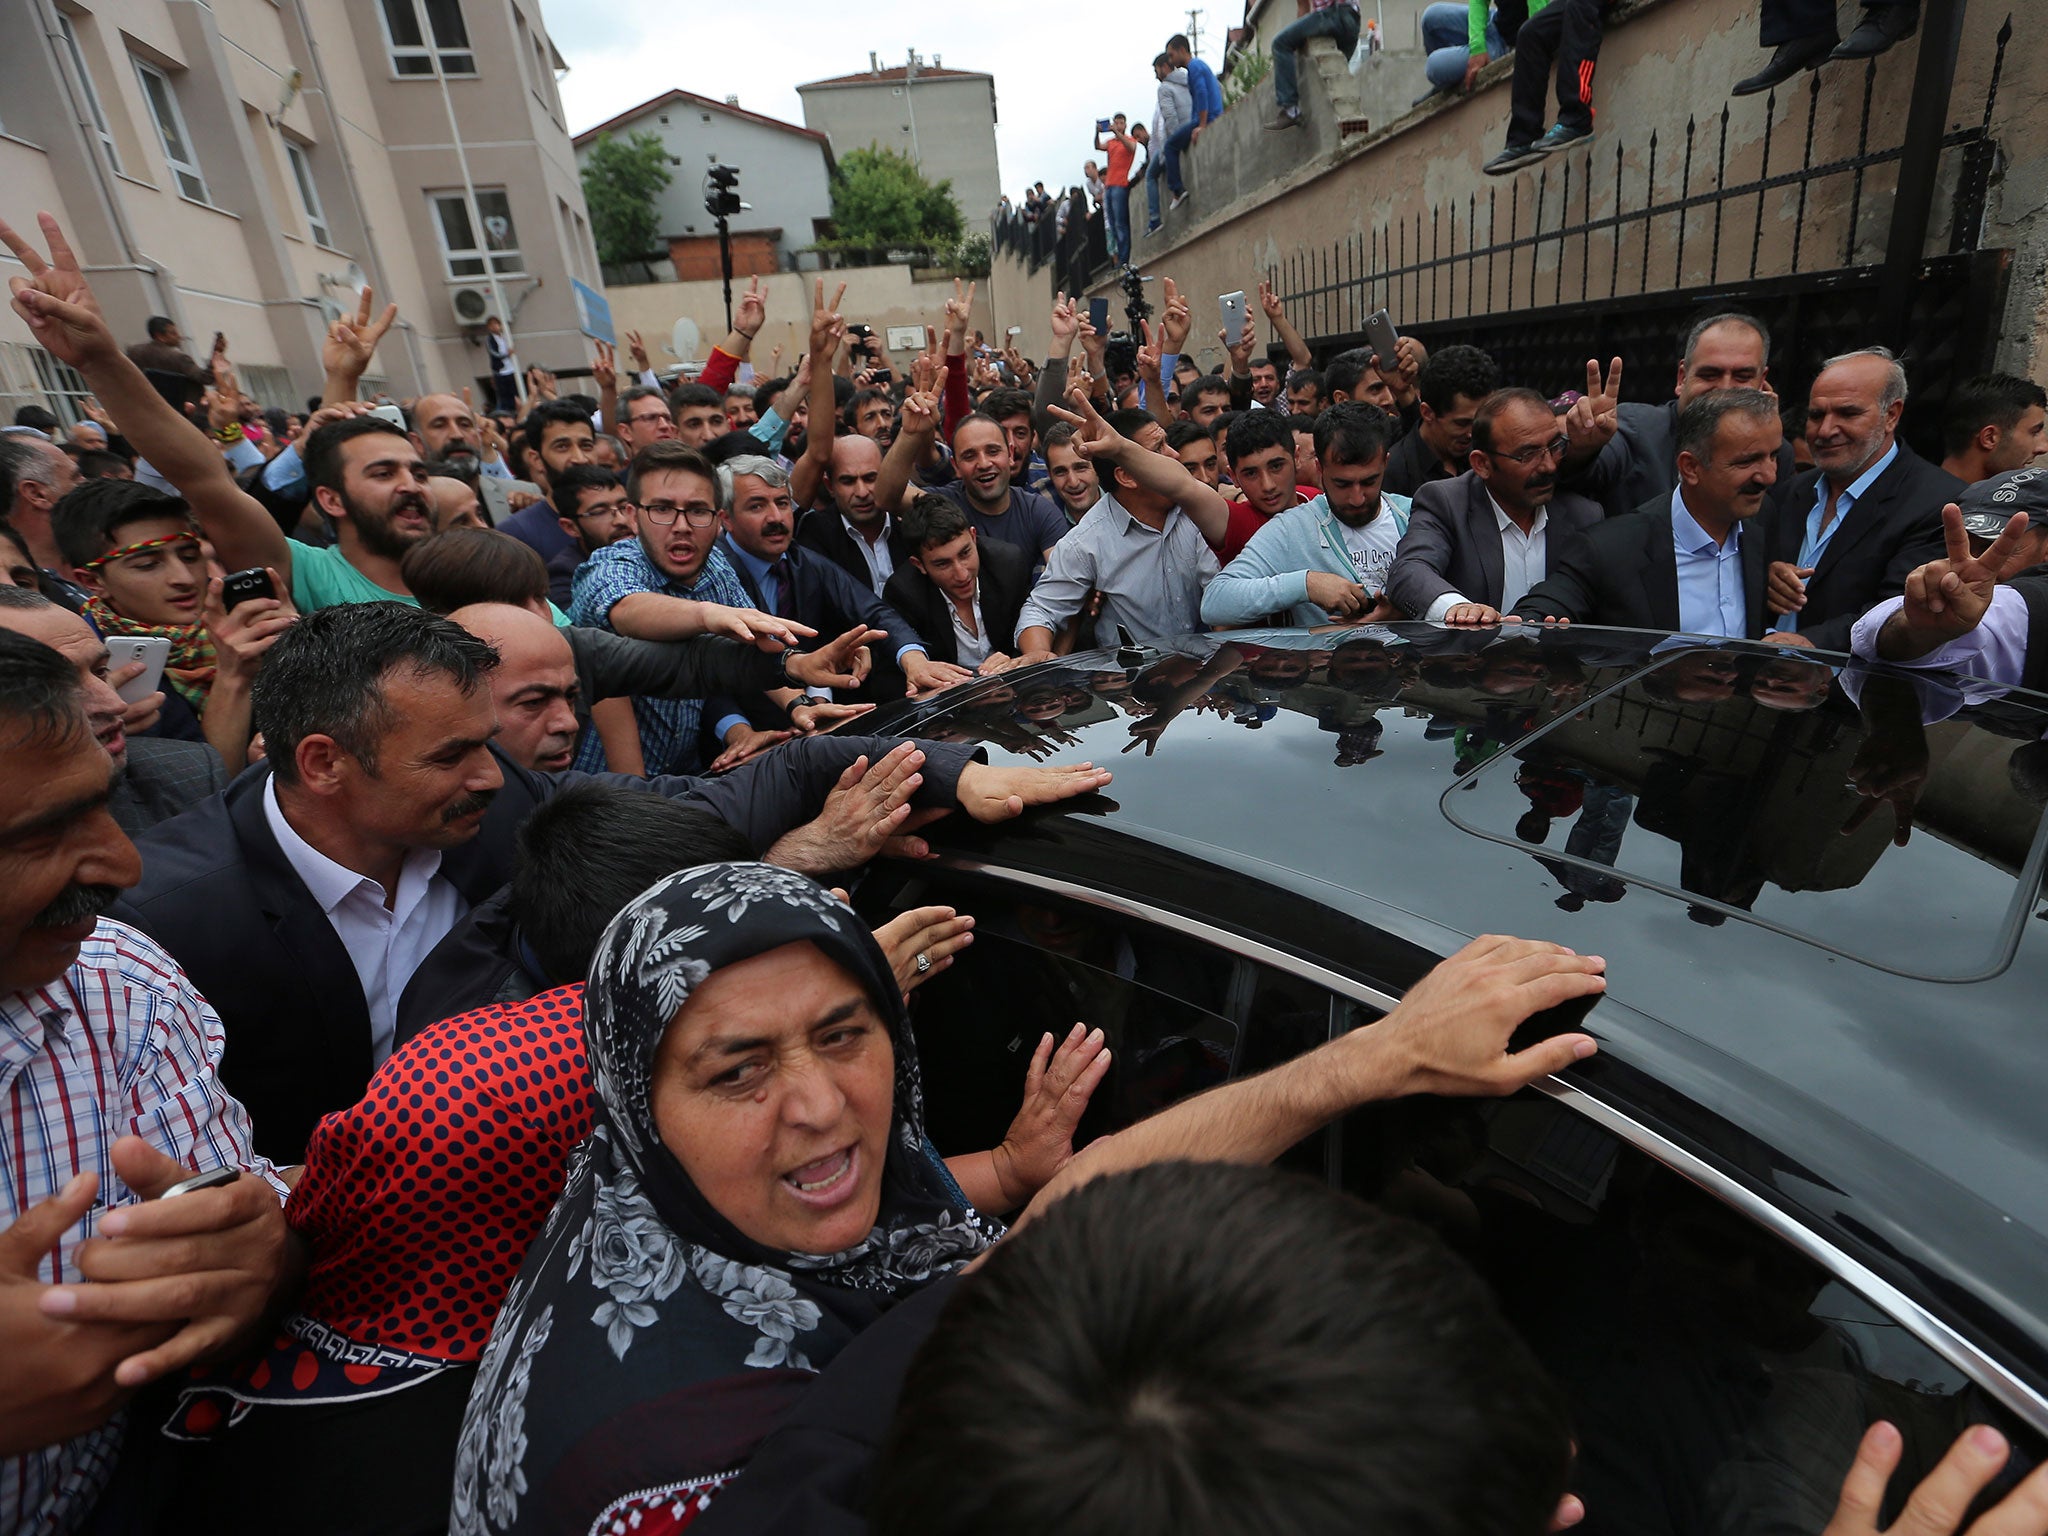 Supporters of Selahattin Demirtas of the pro-Kurdish People’s Democratic Party (HDP) gather round his car as he arrives to cast his vote